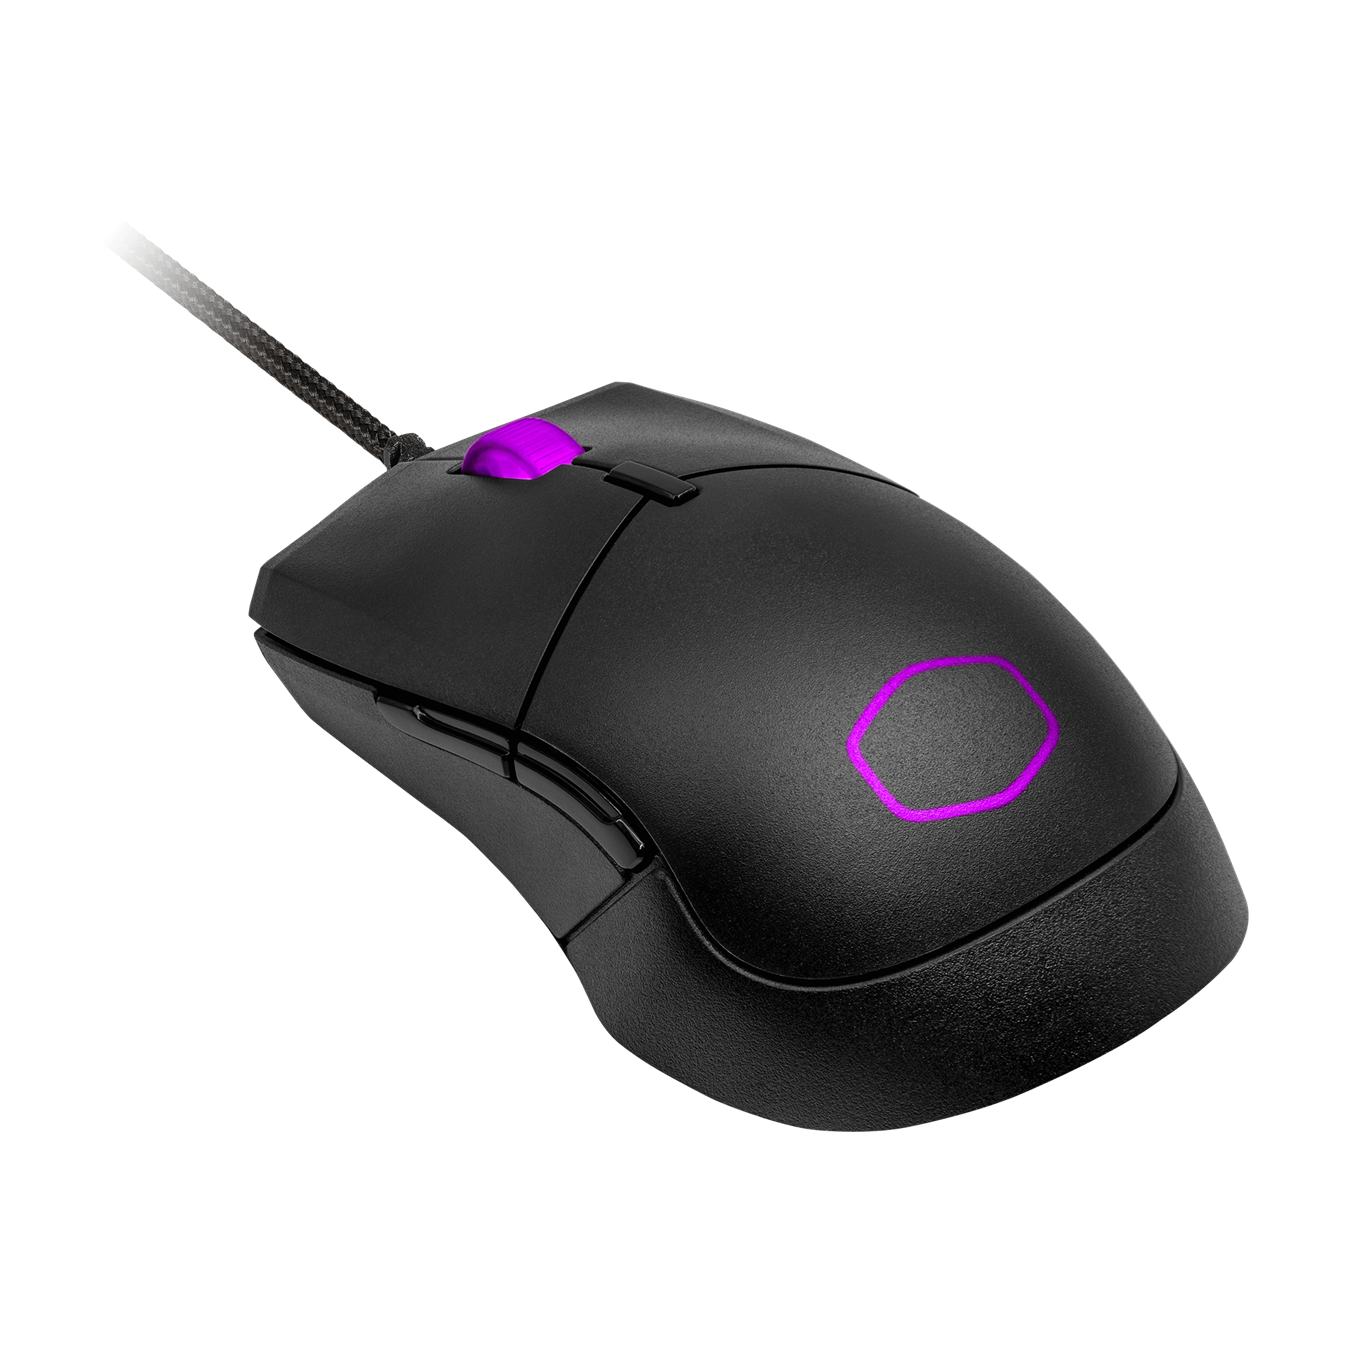 MM310 Gaming Mouse - Optimized for right-handers with two side buttons and weighs in at 50g without exterior holes that compromise on aesthetics